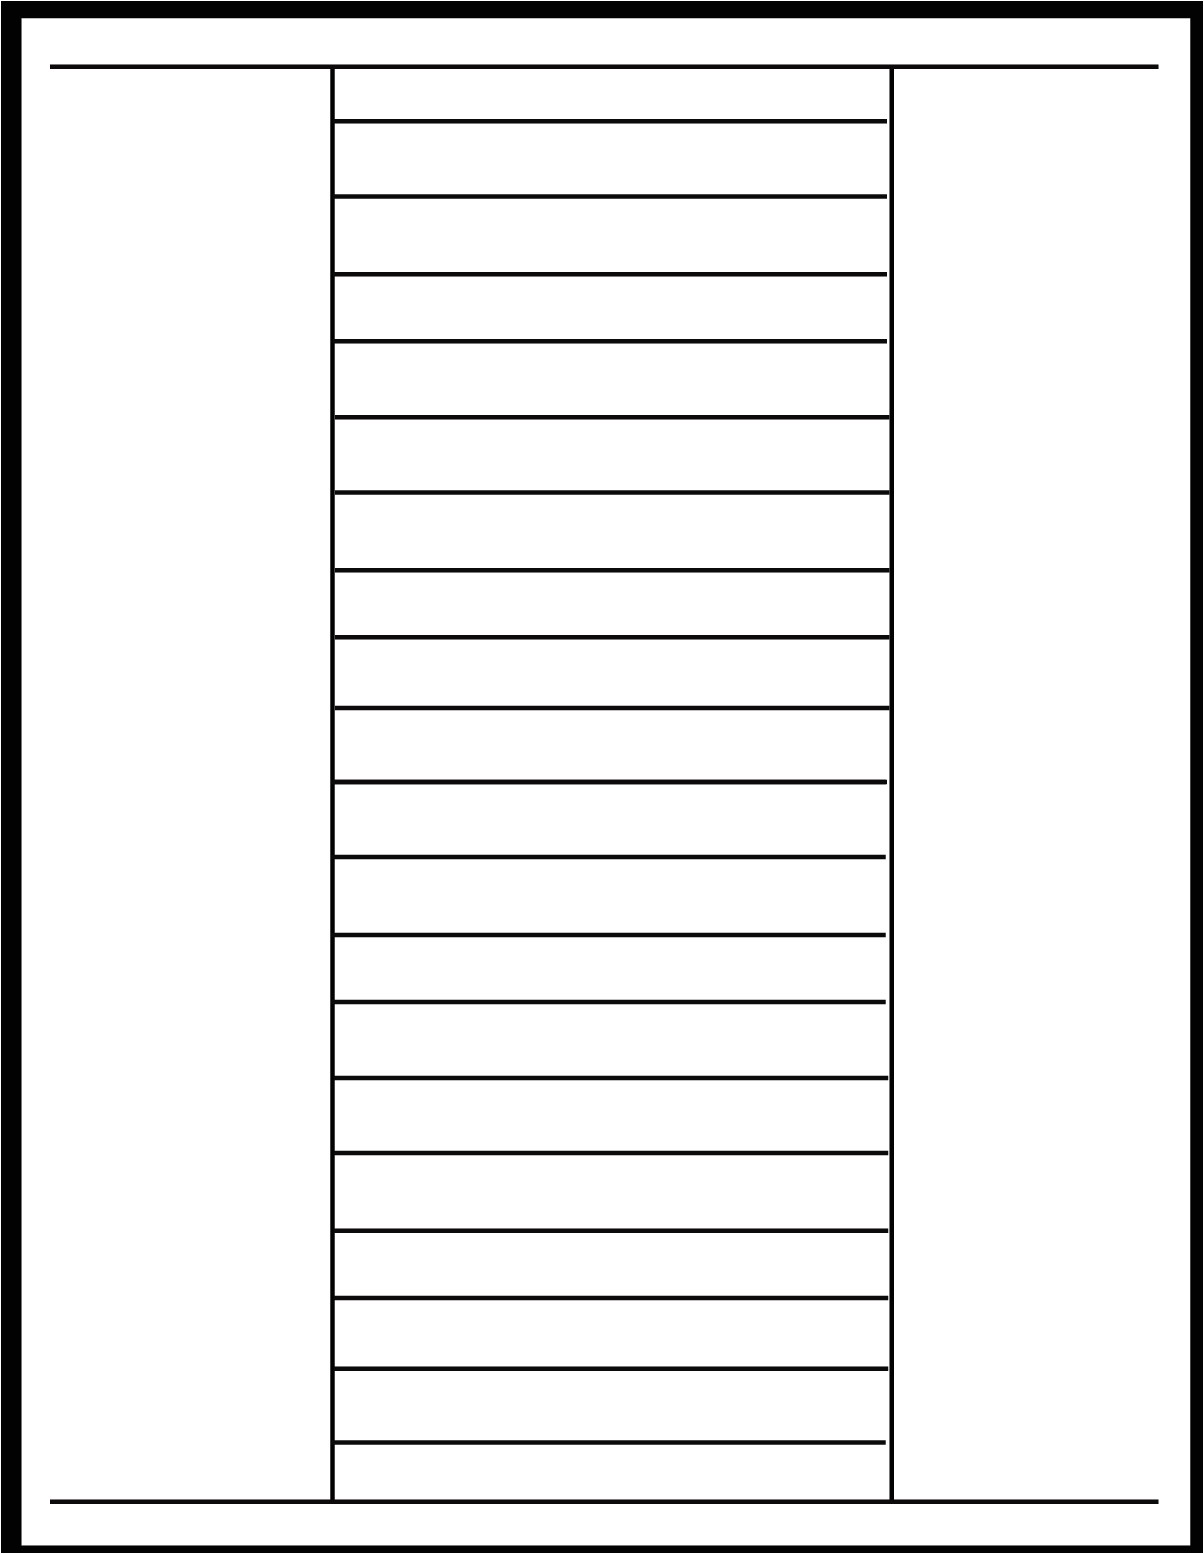 avery-8-tab-clear-label-dividers-template-williamson-ga-us